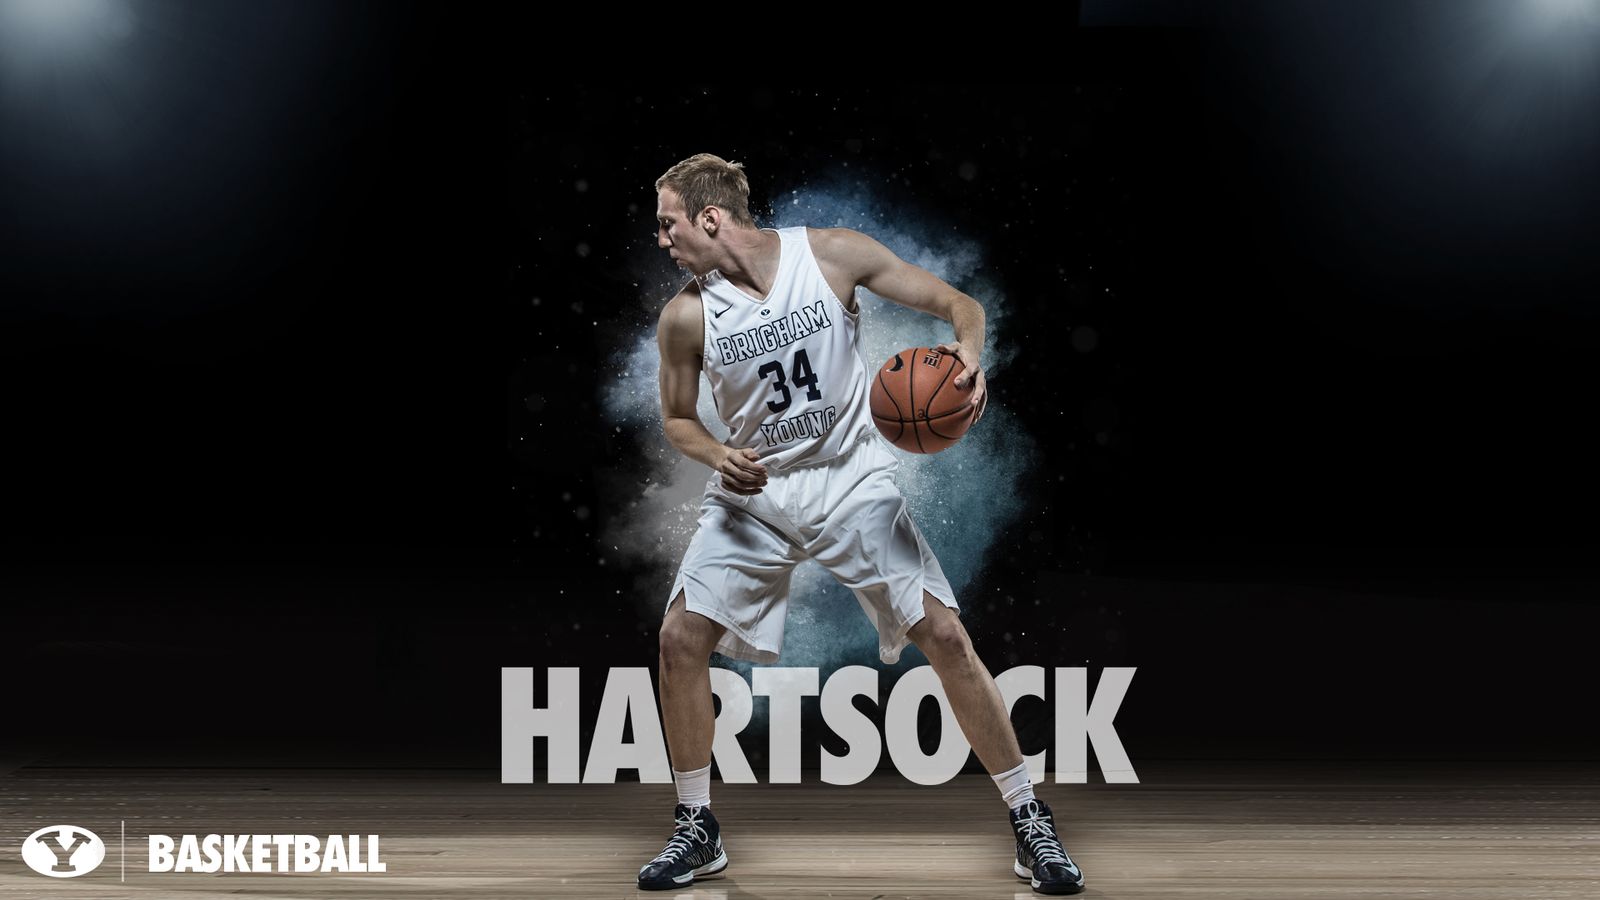 Byu Basketball Player Profile Another Hartsock Is In The Building